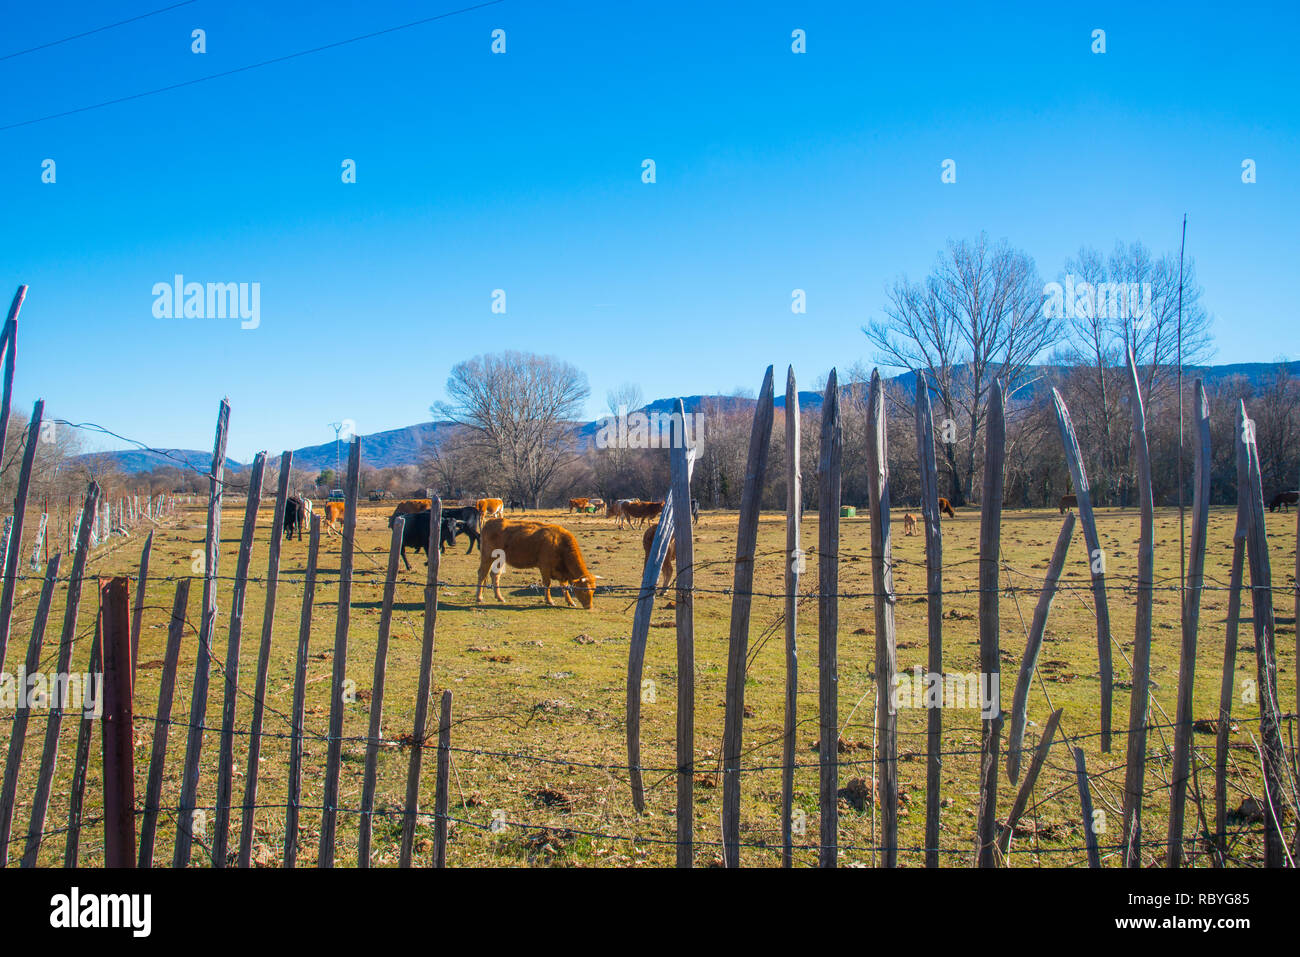 Cows grazing in a meadow. Rascafria, Madrid province, Spain. Stock Photo